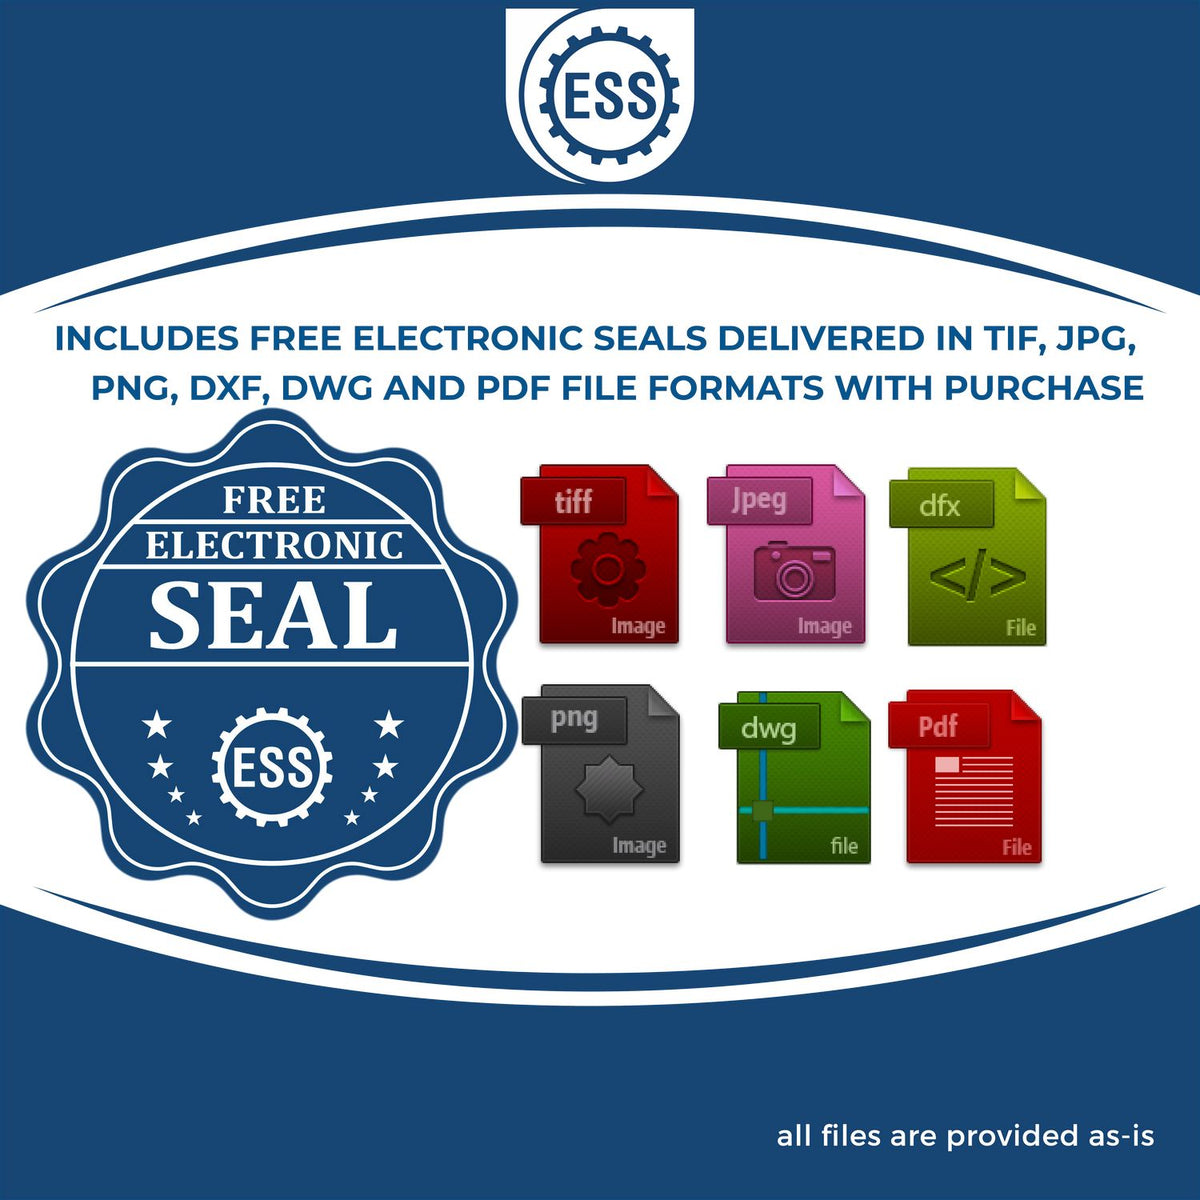 An infographic for the free electronic seal for the Premium MaxLight Pre-Inked North Dakota Engineering Stamp illustrating the different file type icons such as DXF, DWG, TIF, JPG and PNG.